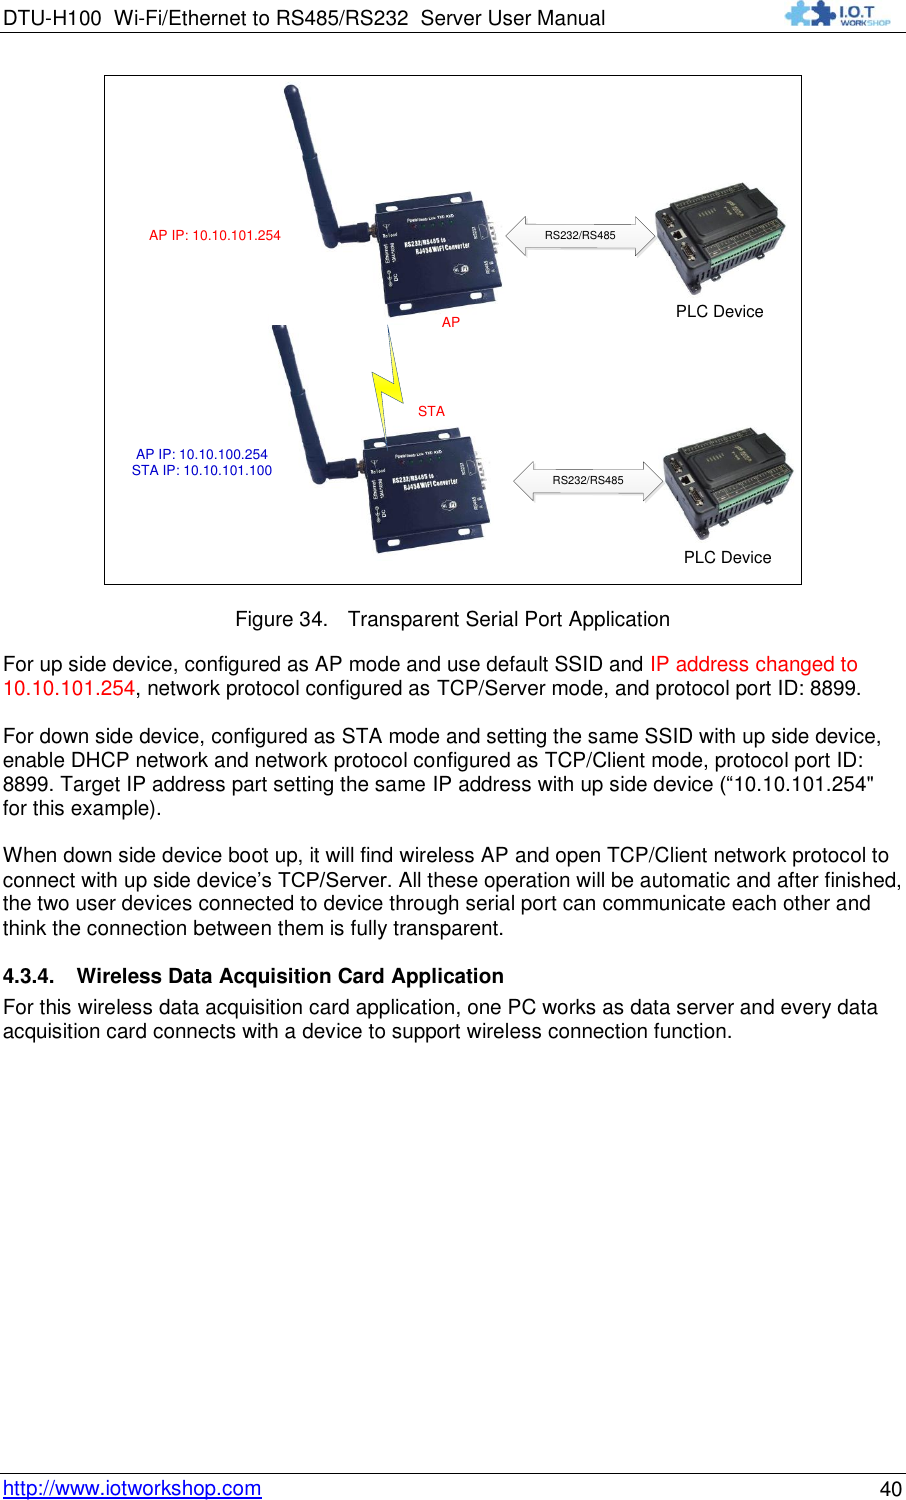 DTU-H100 Wi-Fi/Ethernet to RS485/RS232  Server User Manual    http://www.iotworkshop.com 40 PLC DeviceRS232/RS485AP IP: 10.10.100.254STA IP: 10.10.101.100AP IP: 10.10.101.254APSTAPLC DeviceRS232/RS485 Figure 34. Transparent Serial Port Application For up side device, configured as AP mode and use default SSID and IP address changed to 10.10.101.254, network protocol configured as TCP/Server mode, and protocol port ID: 8899.  For down side device, configured as STA mode and setting the same SSID with up side device, enable DHCP network and network protocol configured as TCP/Client mode, protocol port ID: 8899. Target IP address part setting the same IP address with up side device (“10.10.101.254&quot; for this example).  When down side device boot up, it will find wireless AP and open TCP/Client network protocol to connect with up side device‟s TCP/Server. All these operation will be automatic and after finished, the two user devices connected to device through serial port can communicate each other and think the connection between them is fully transparent. 4.3.4. Wireless Data Acquisition Card Application For this wireless data acquisition card application, one PC works as data server and every data acquisition card connects with a device to support wireless connection function. 